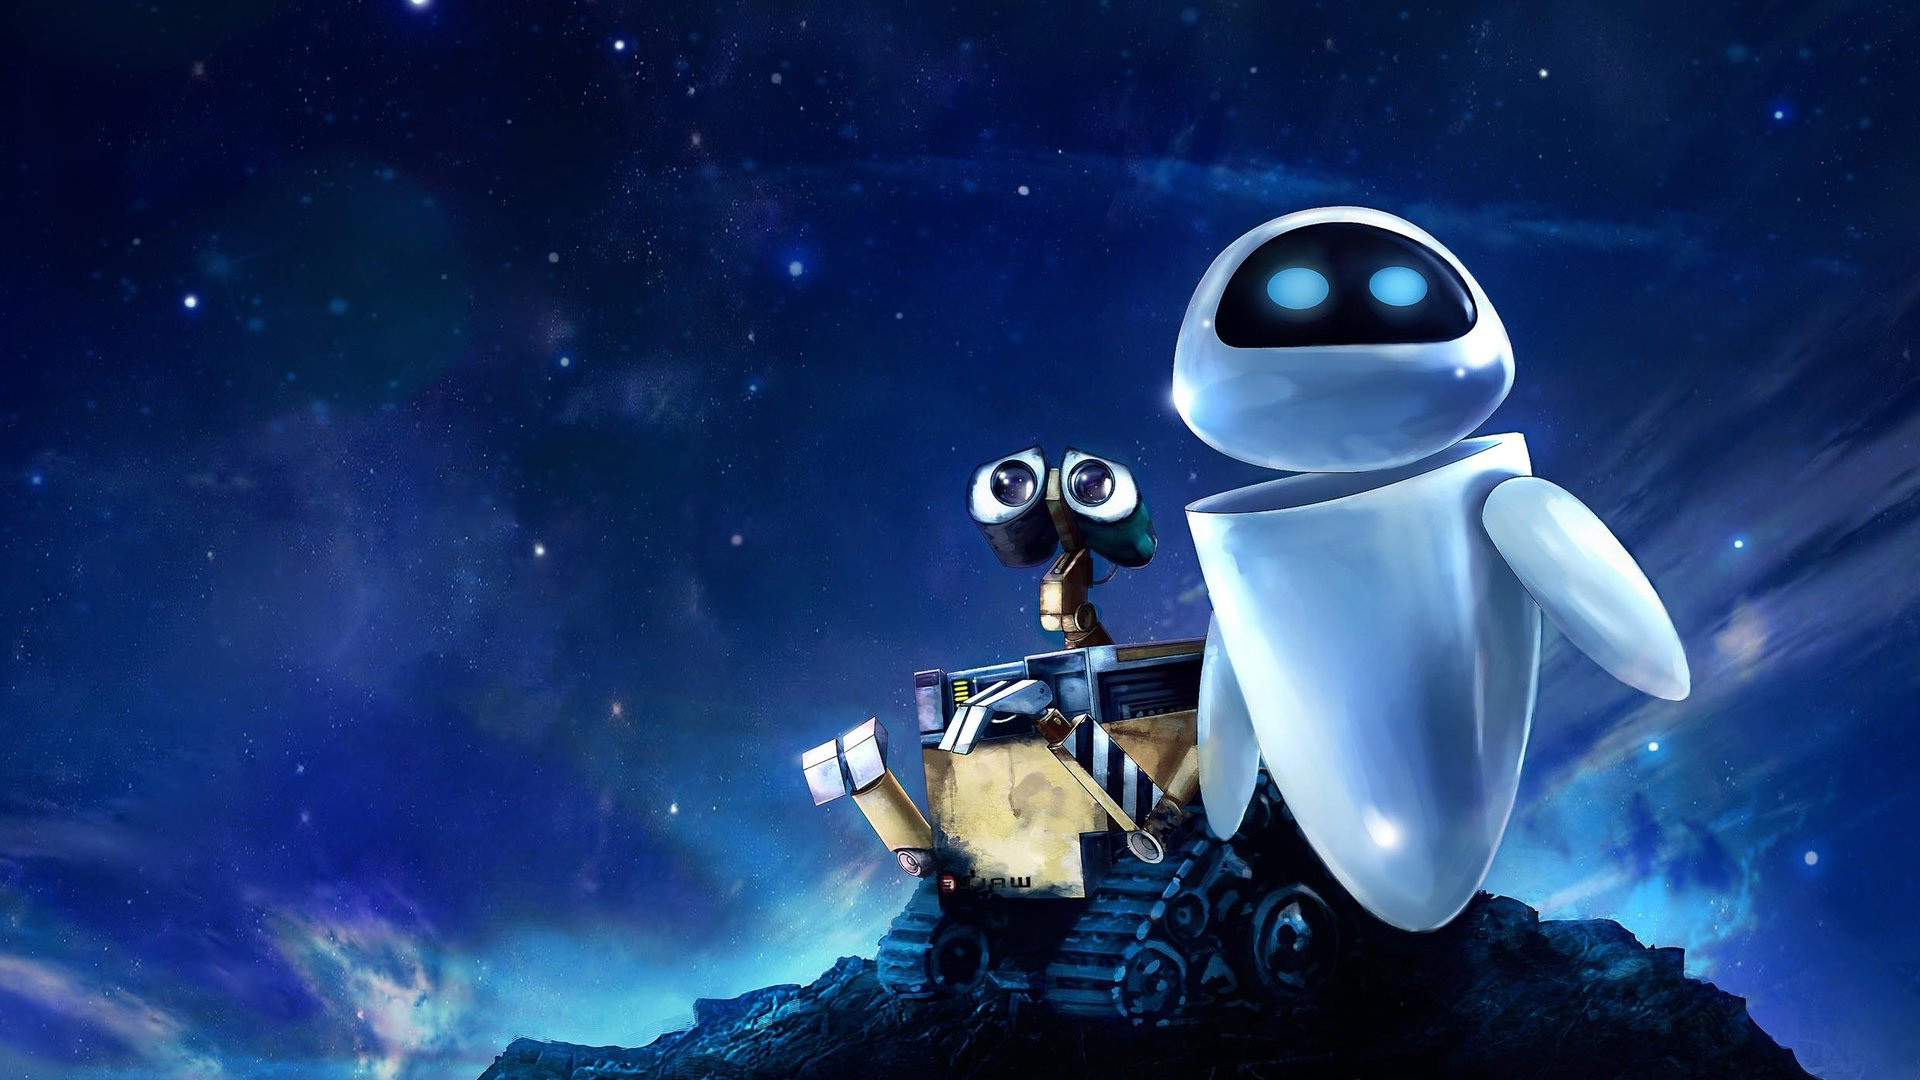 1920x1080 Wall-E Wallpapers | Just Good Vibe